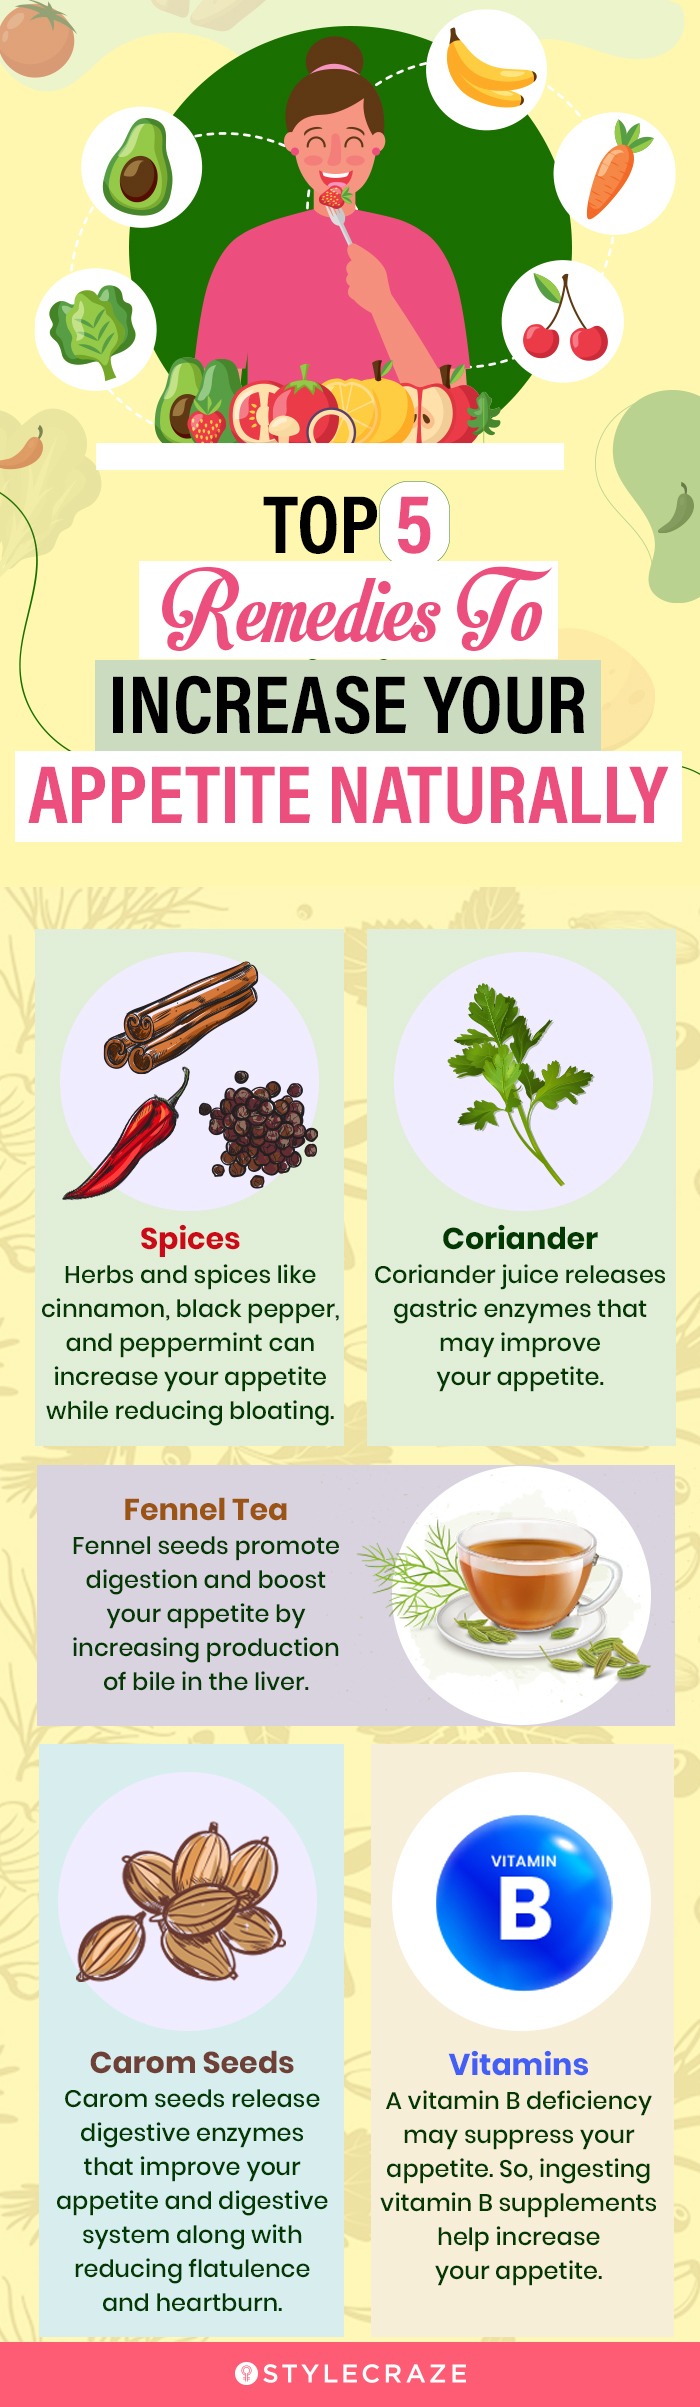 top 5 remedies to increase your appetite naturally (infographic)